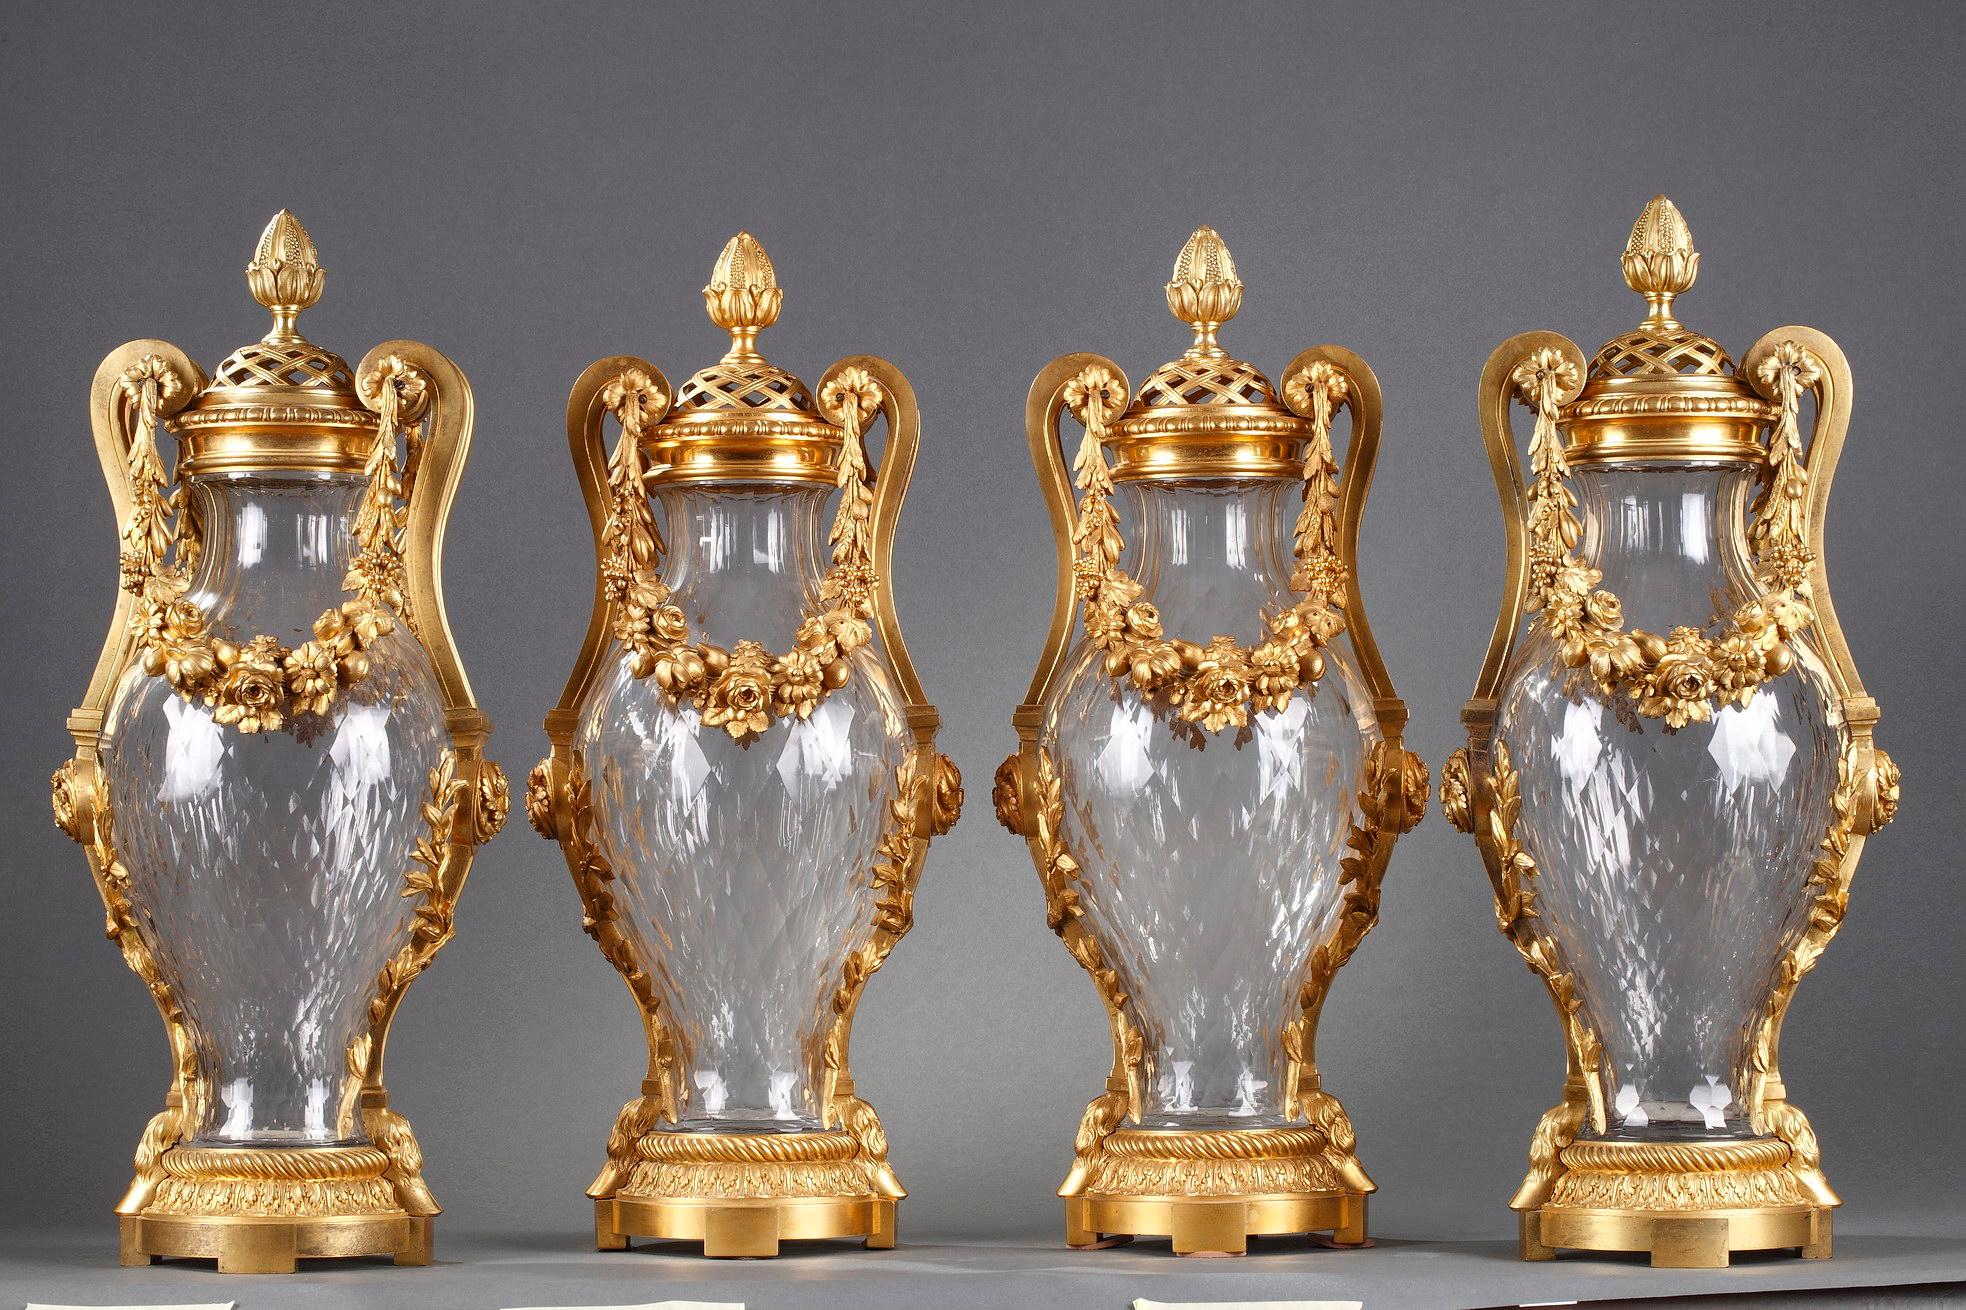 A very fine and rare set of four baluster-shaped covered vases made of faceted ovoid cut Baccarat crystal and adorned with a bronze mount of exceptional quality and kept with its original gilding. Each topped with a pierced cover surmounted by a